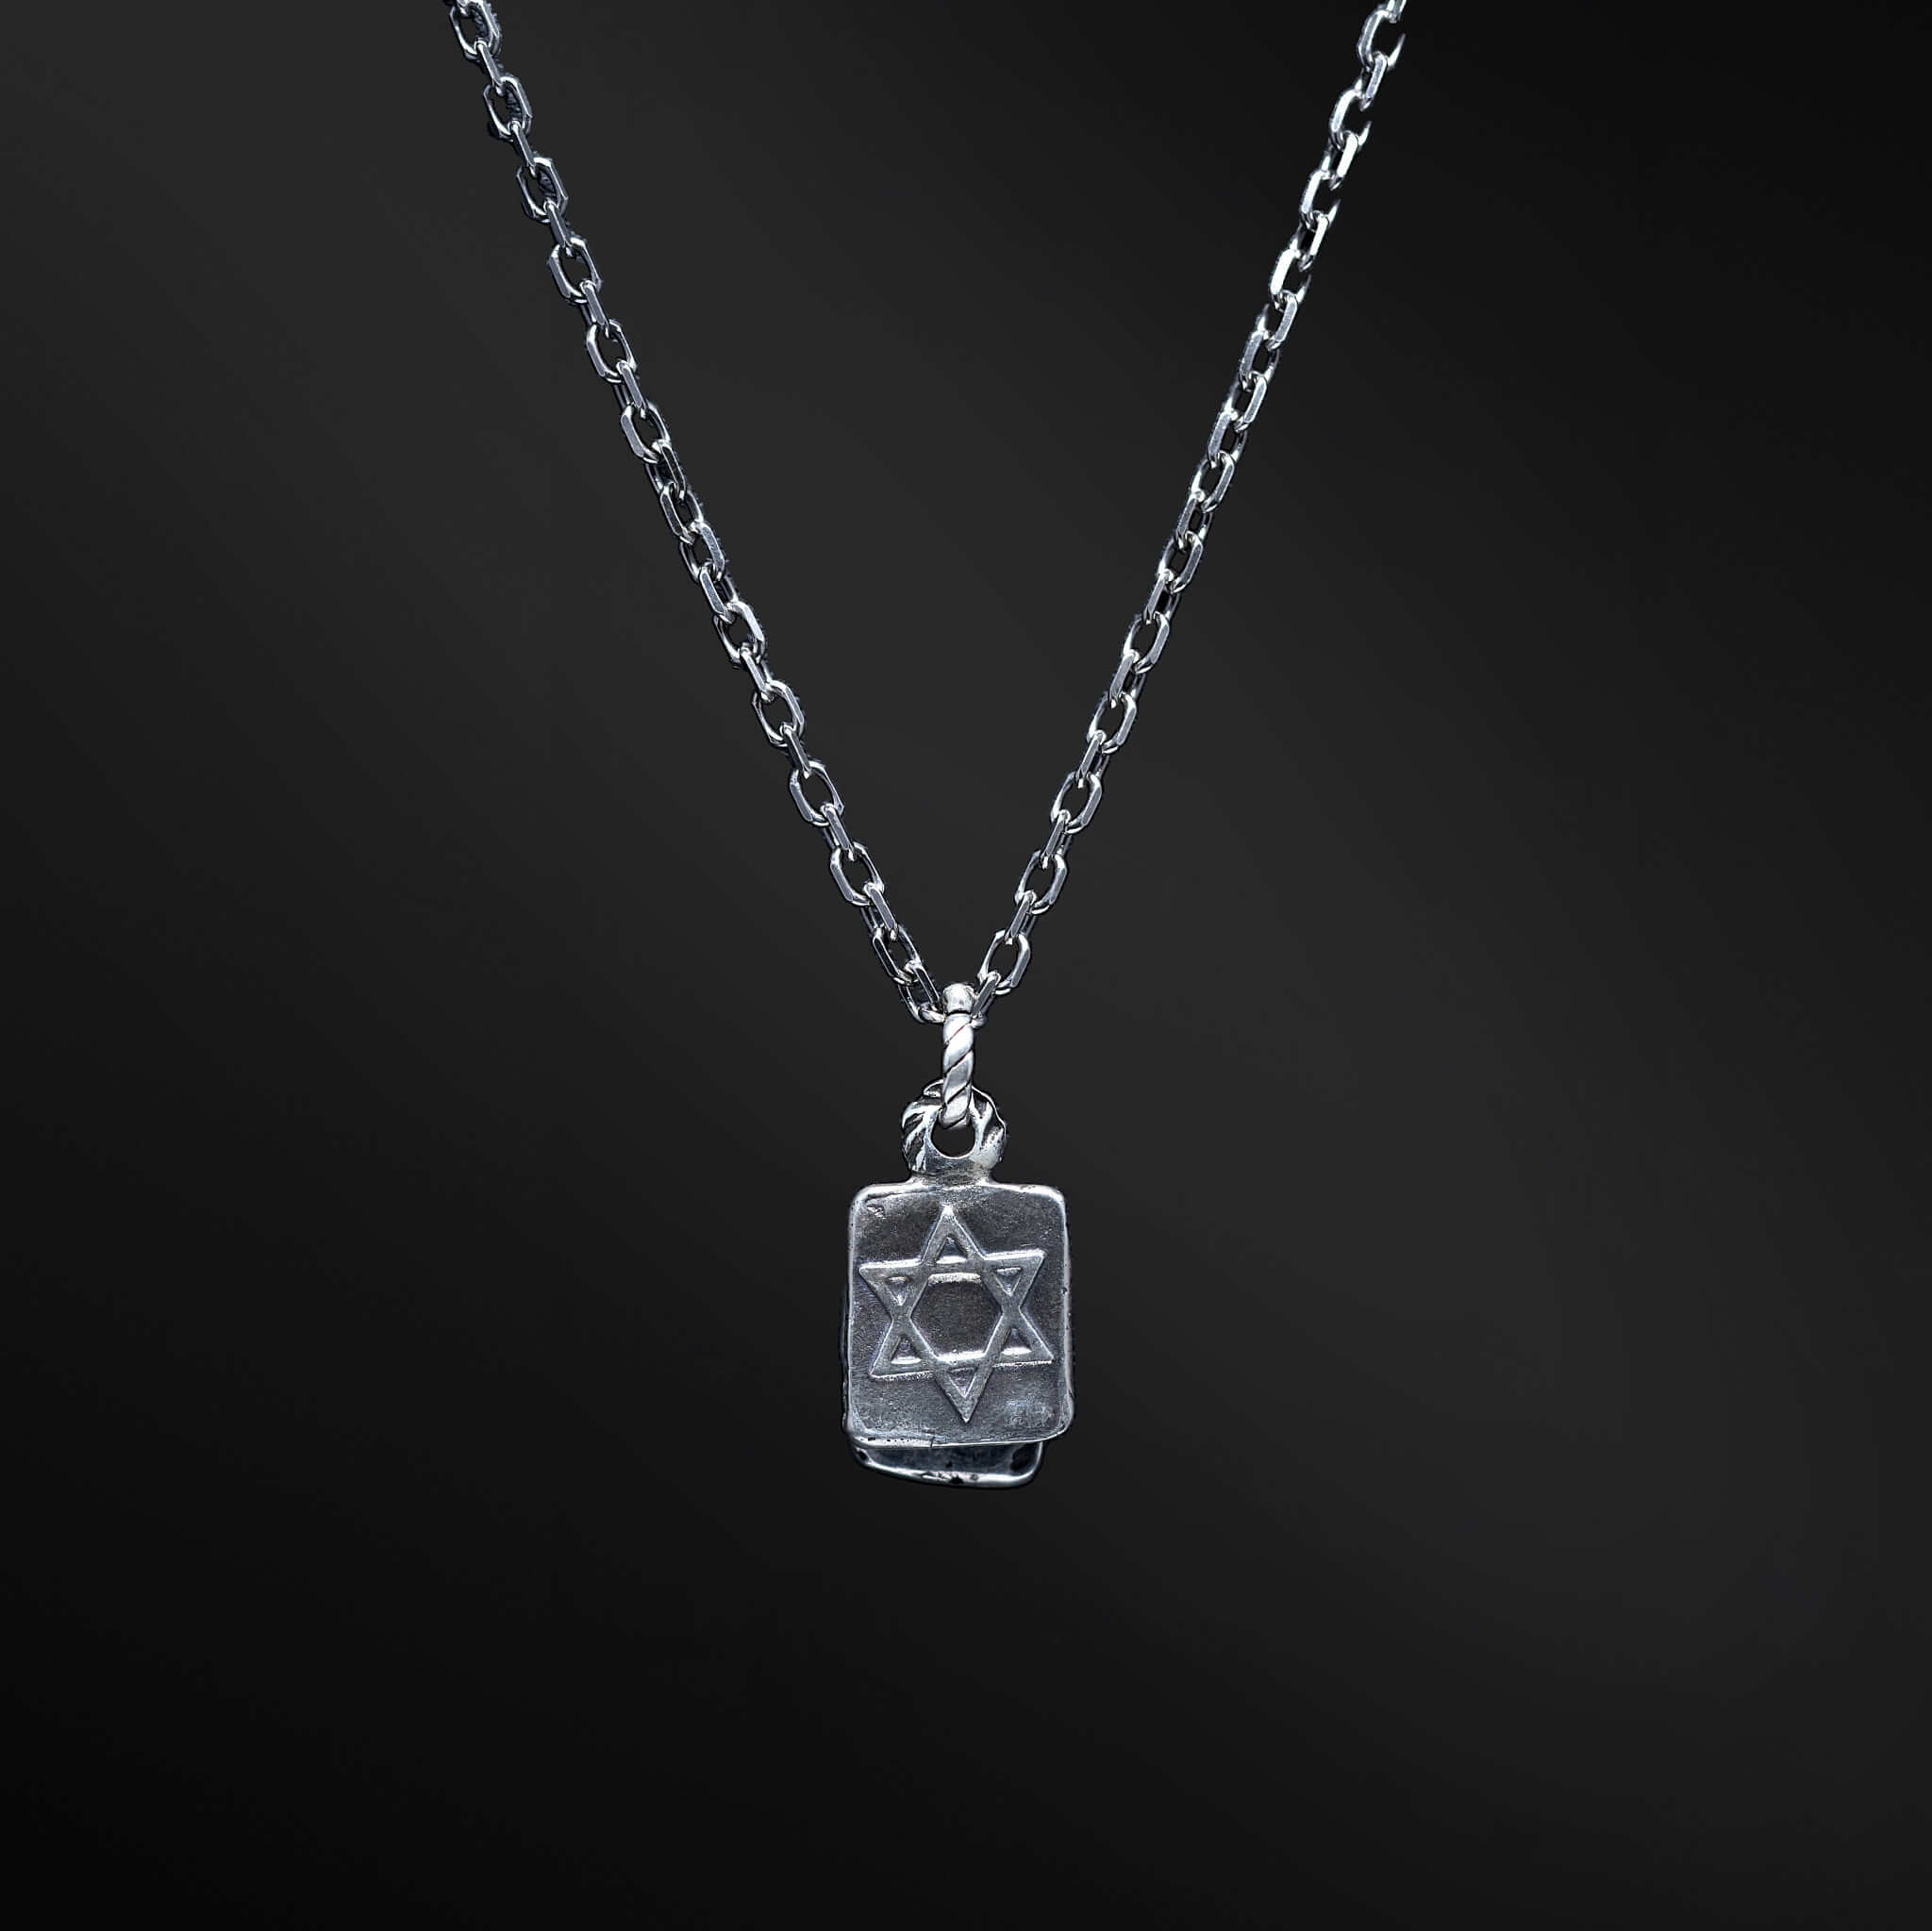 &quot;Aley Pendant: An image showcasing the captivating Aley pendant. The pendant exhibits two optional plaques with the Hebrew letters Alef and Yud, as well as a beautifully crafted Magen David (Star of David). The photo highlights the intricate details and elegance of the pendant, offering a glimpse of its personalized expression and symbolic representation. A visual testament to the wearer&